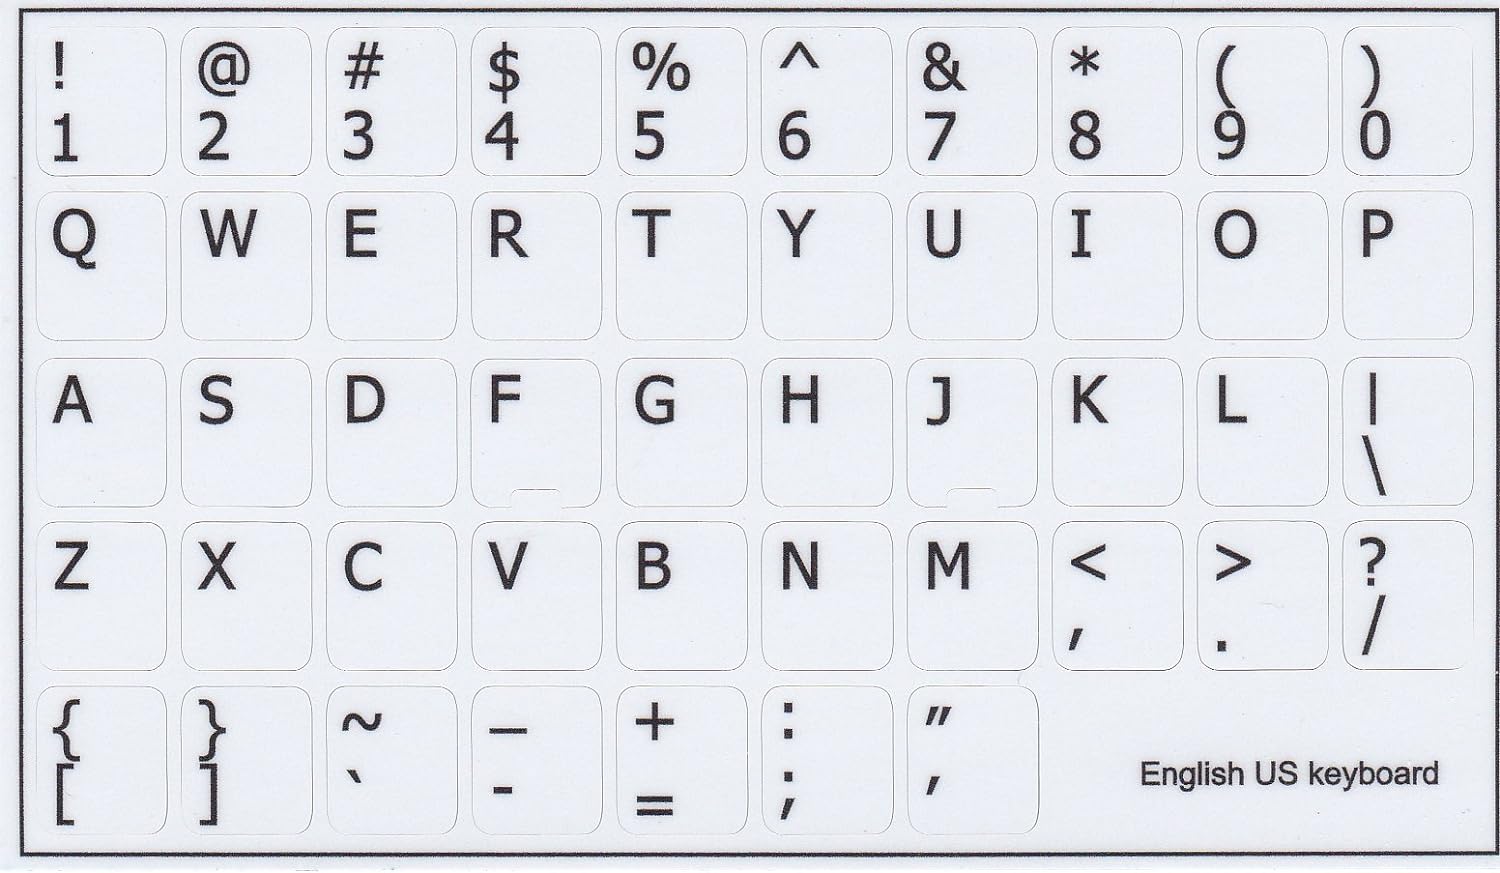 Replace US keyboard stickers